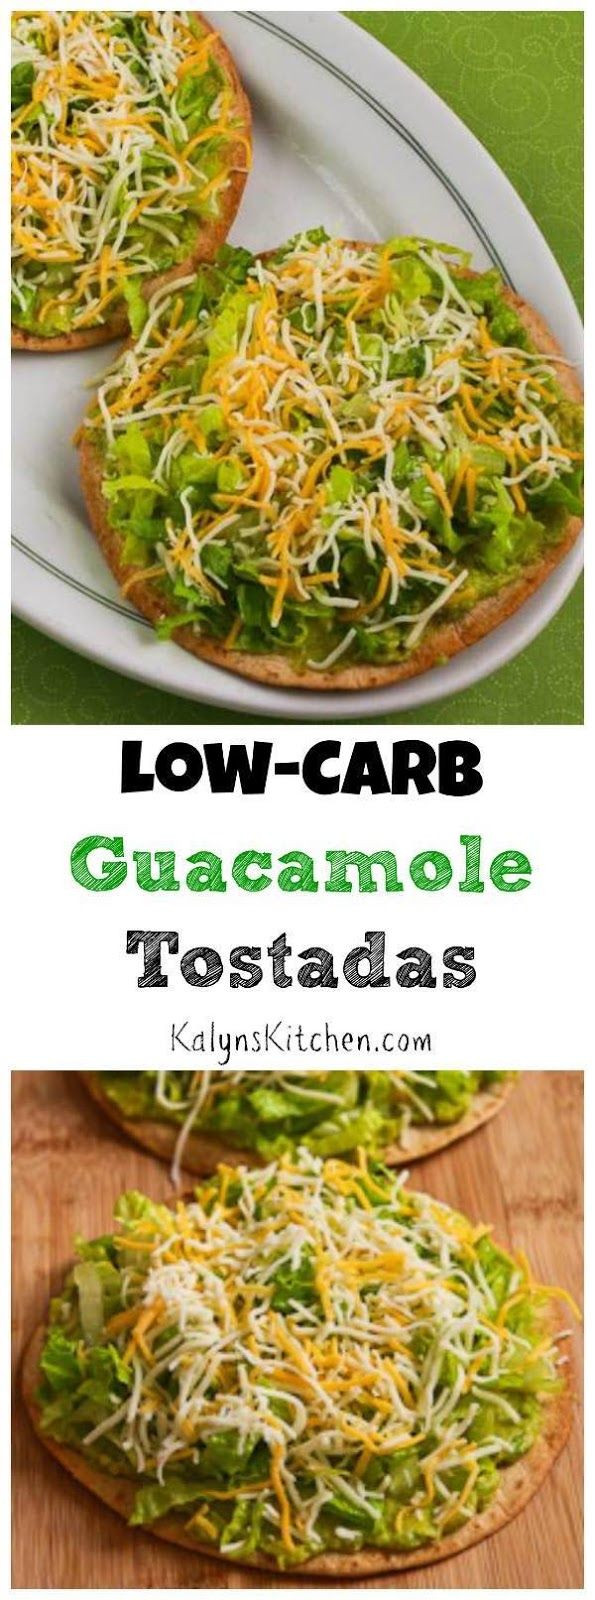 High Protein Low Carb Vegetarian Recipes
 25 best ideas about Lettuce types on Pinterest